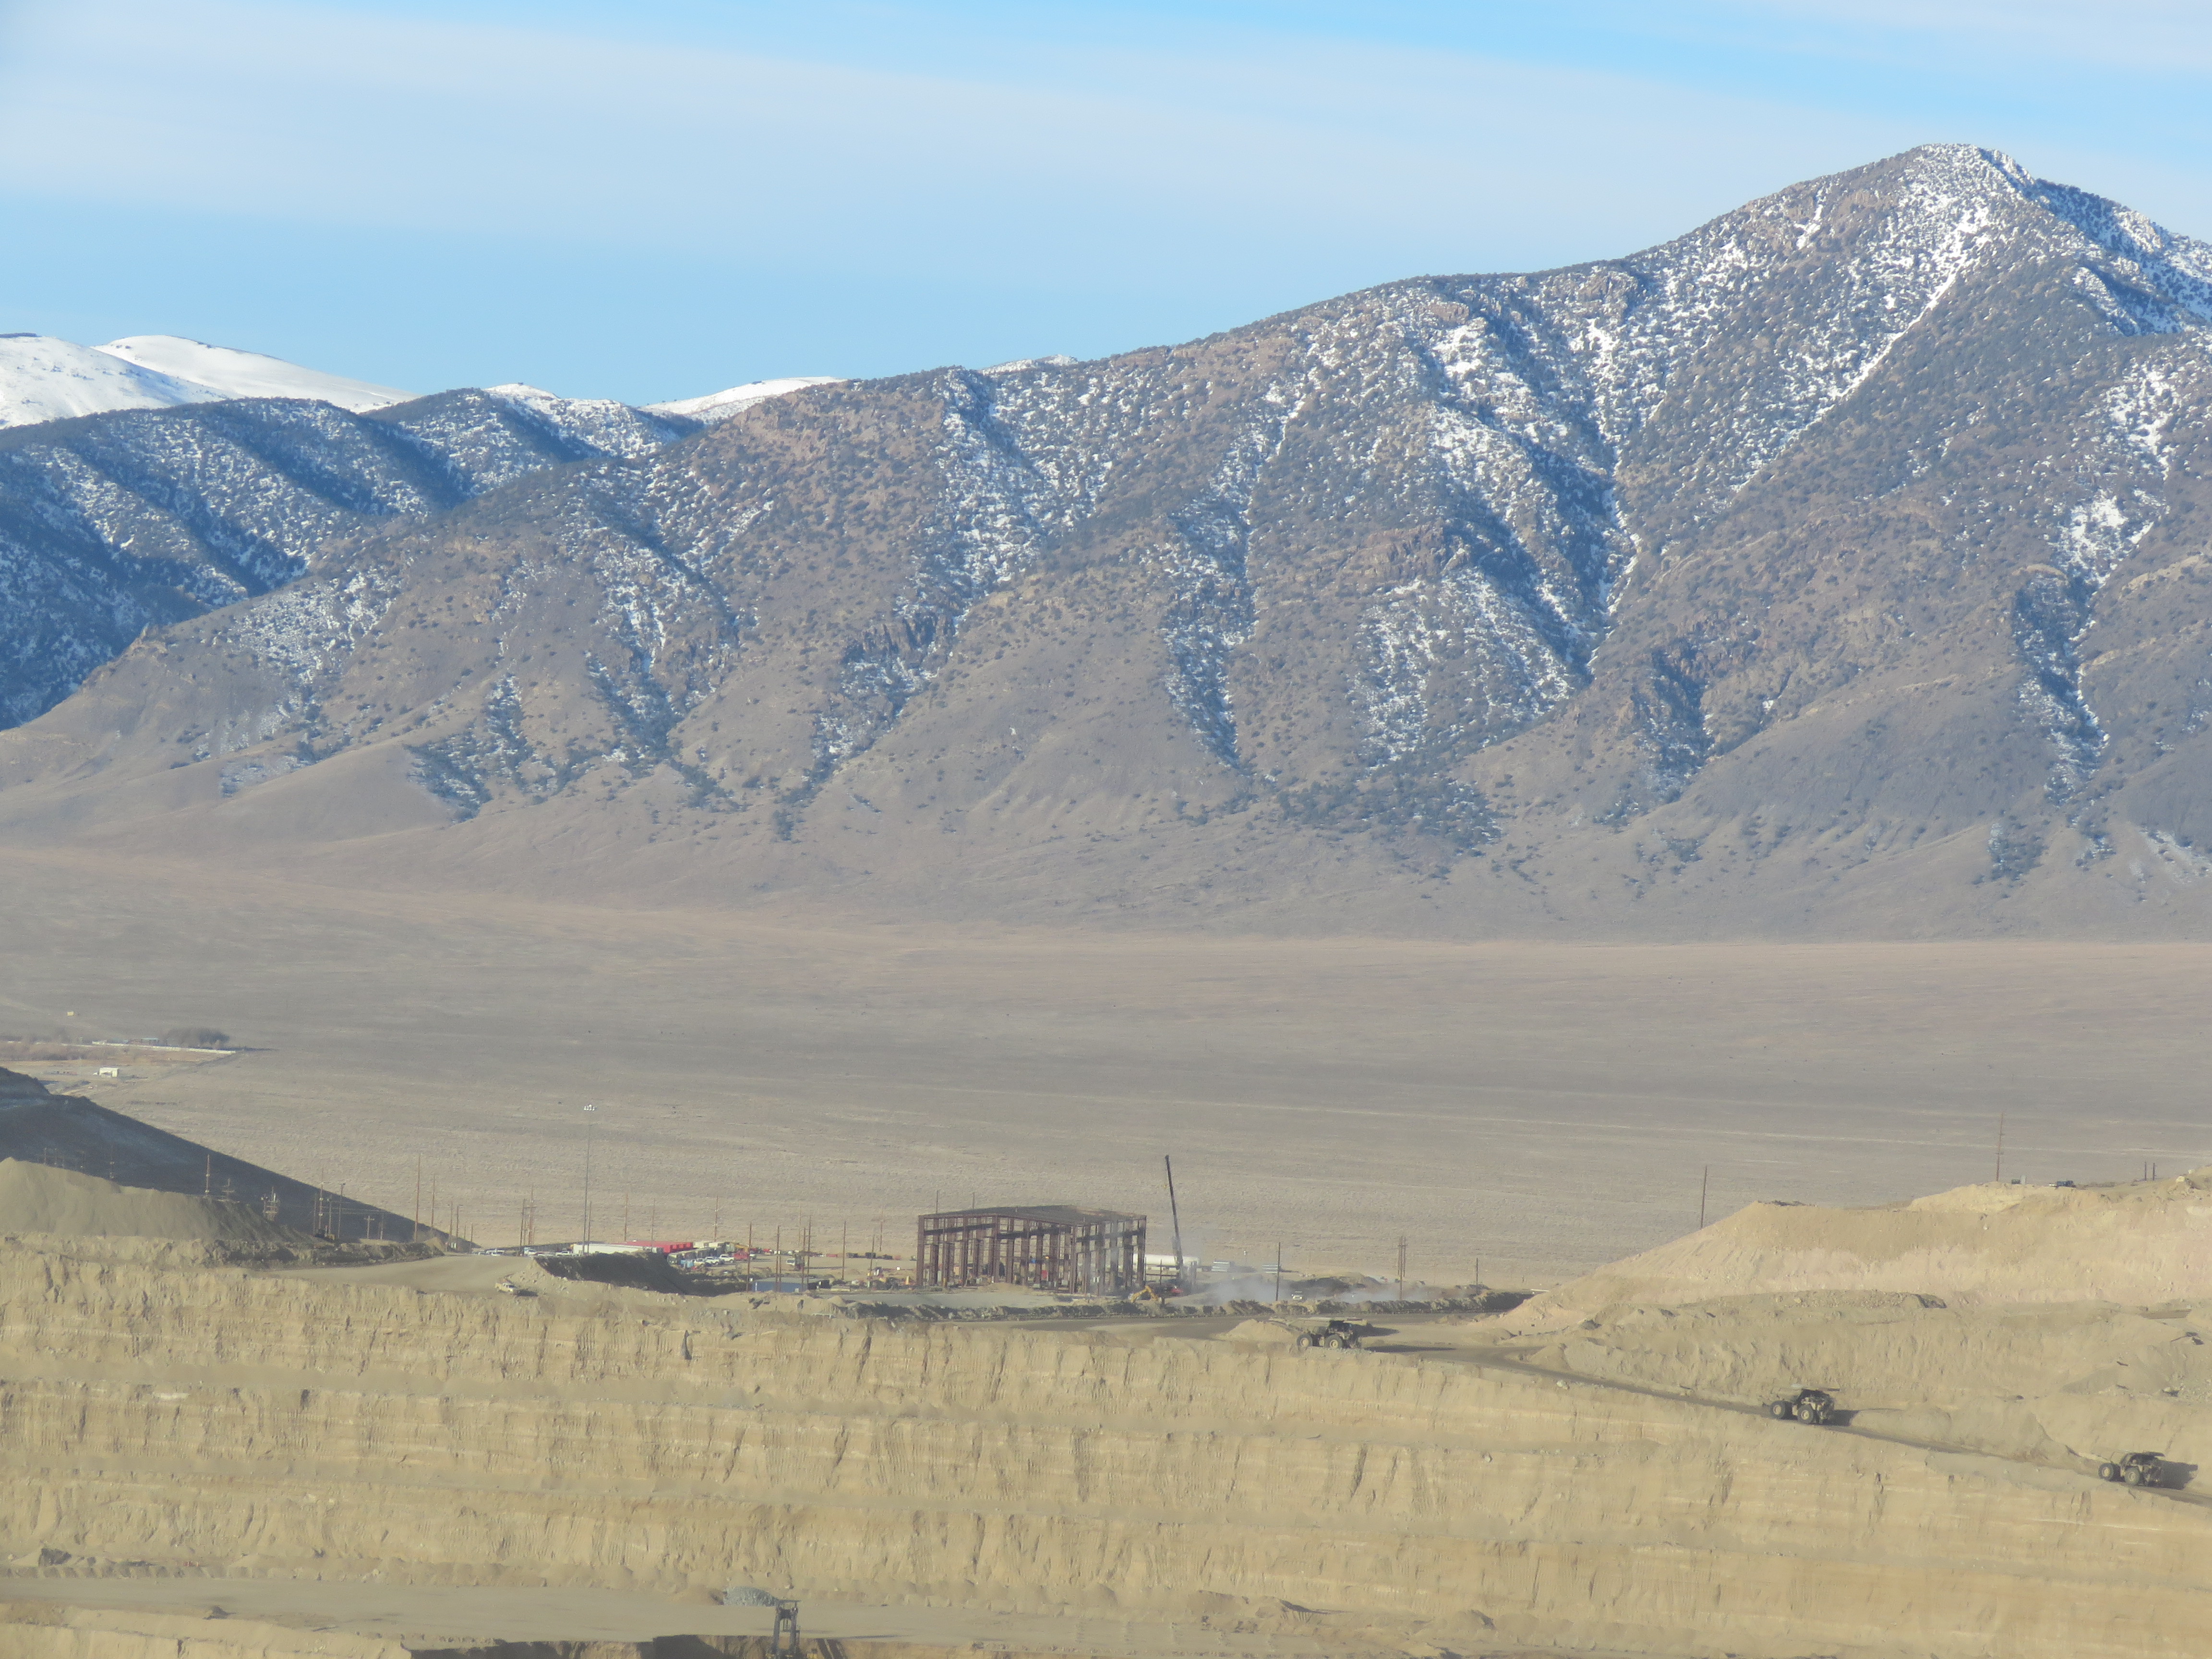 A large-tonnage open-pit operation, Round Mountain is known for its high yields of gold, as well as its safety and environmental programs. The mine is a strong supporter of local community initiatives and serves as the largest private employer in Nye County, Nevada. 